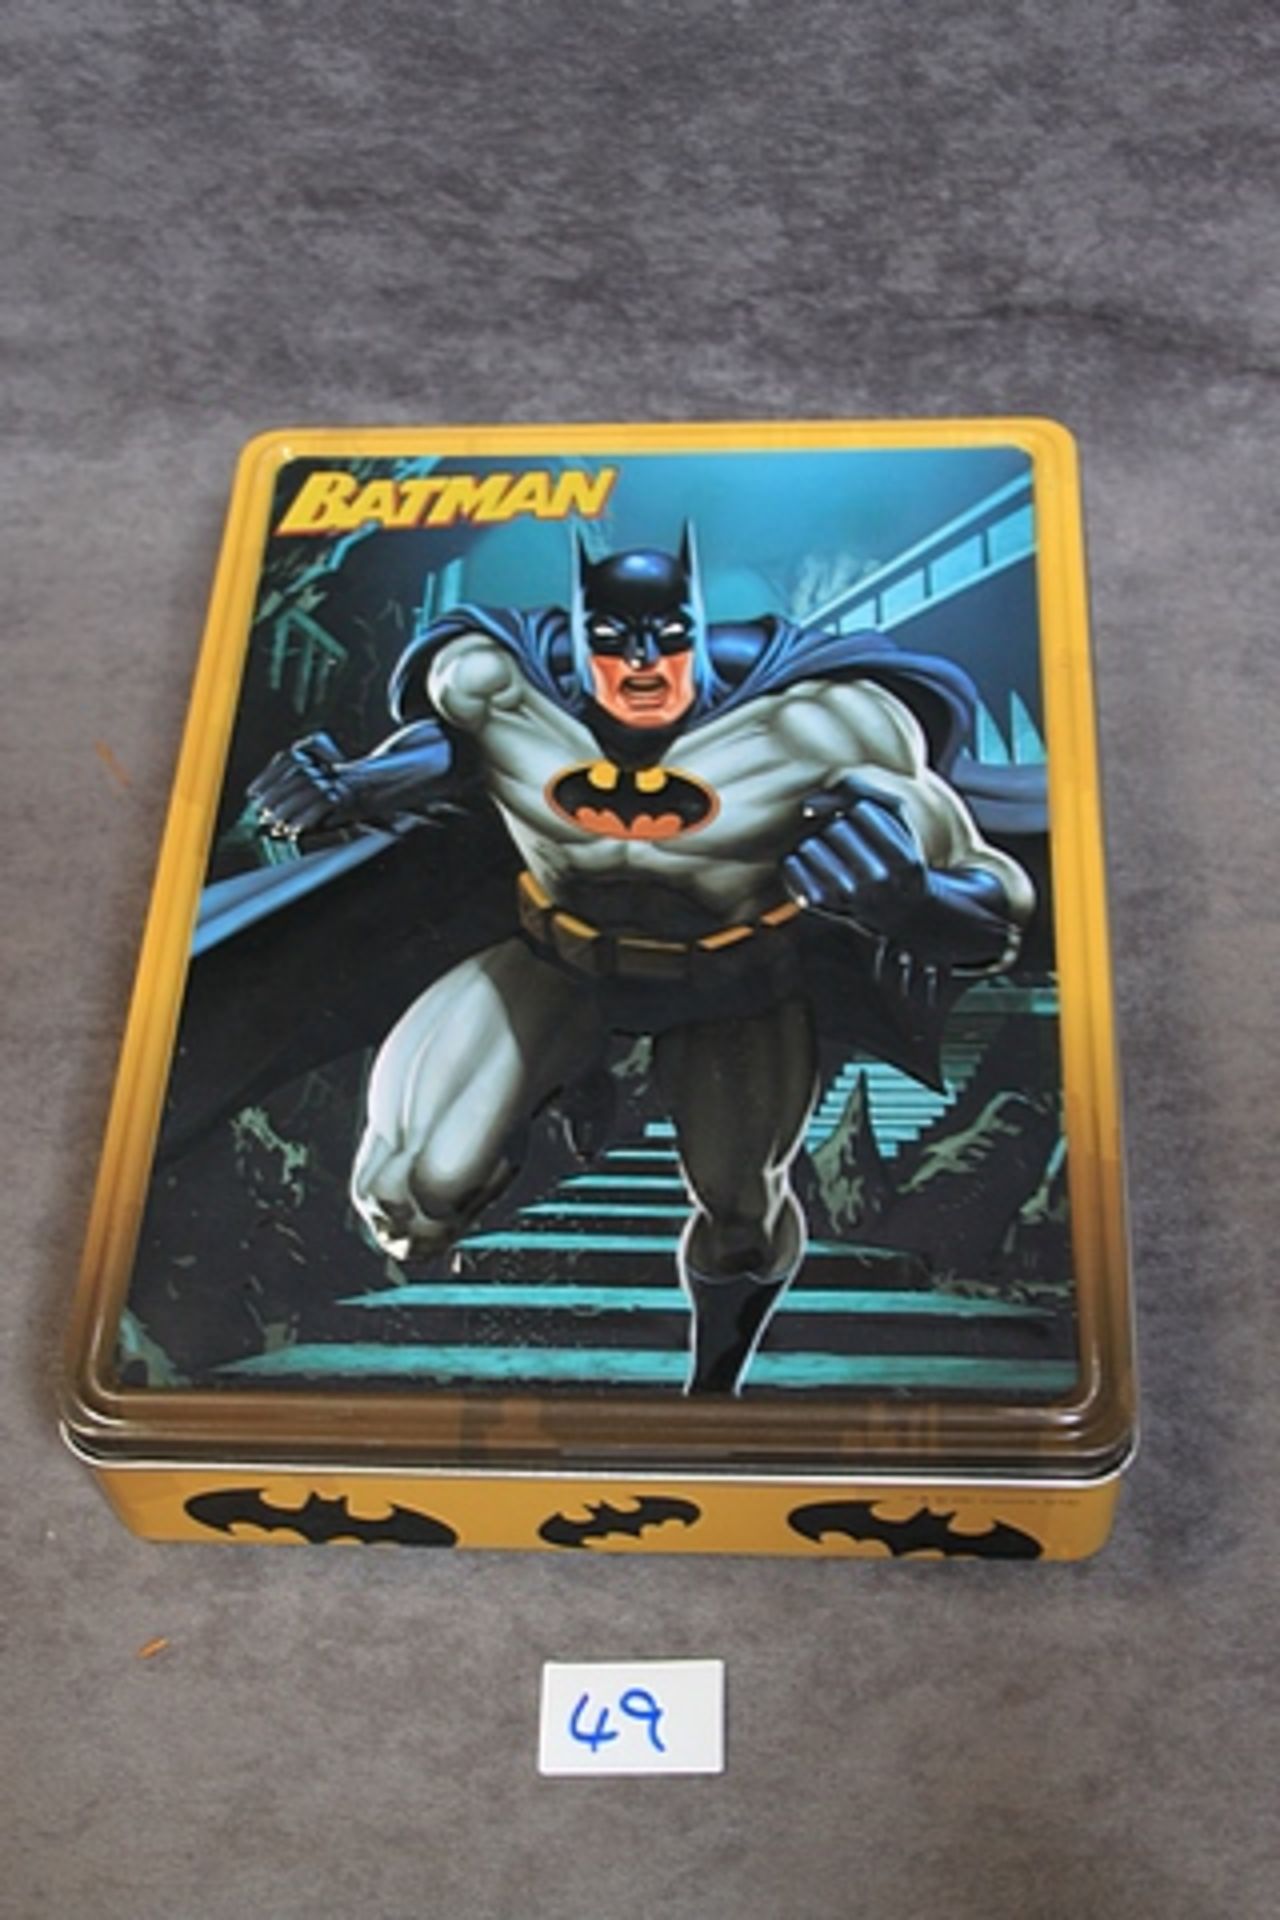 Tin Batman Batman Pressed Tin Box Contains Colour Book Story Book And A Neal Manning Paper Model X